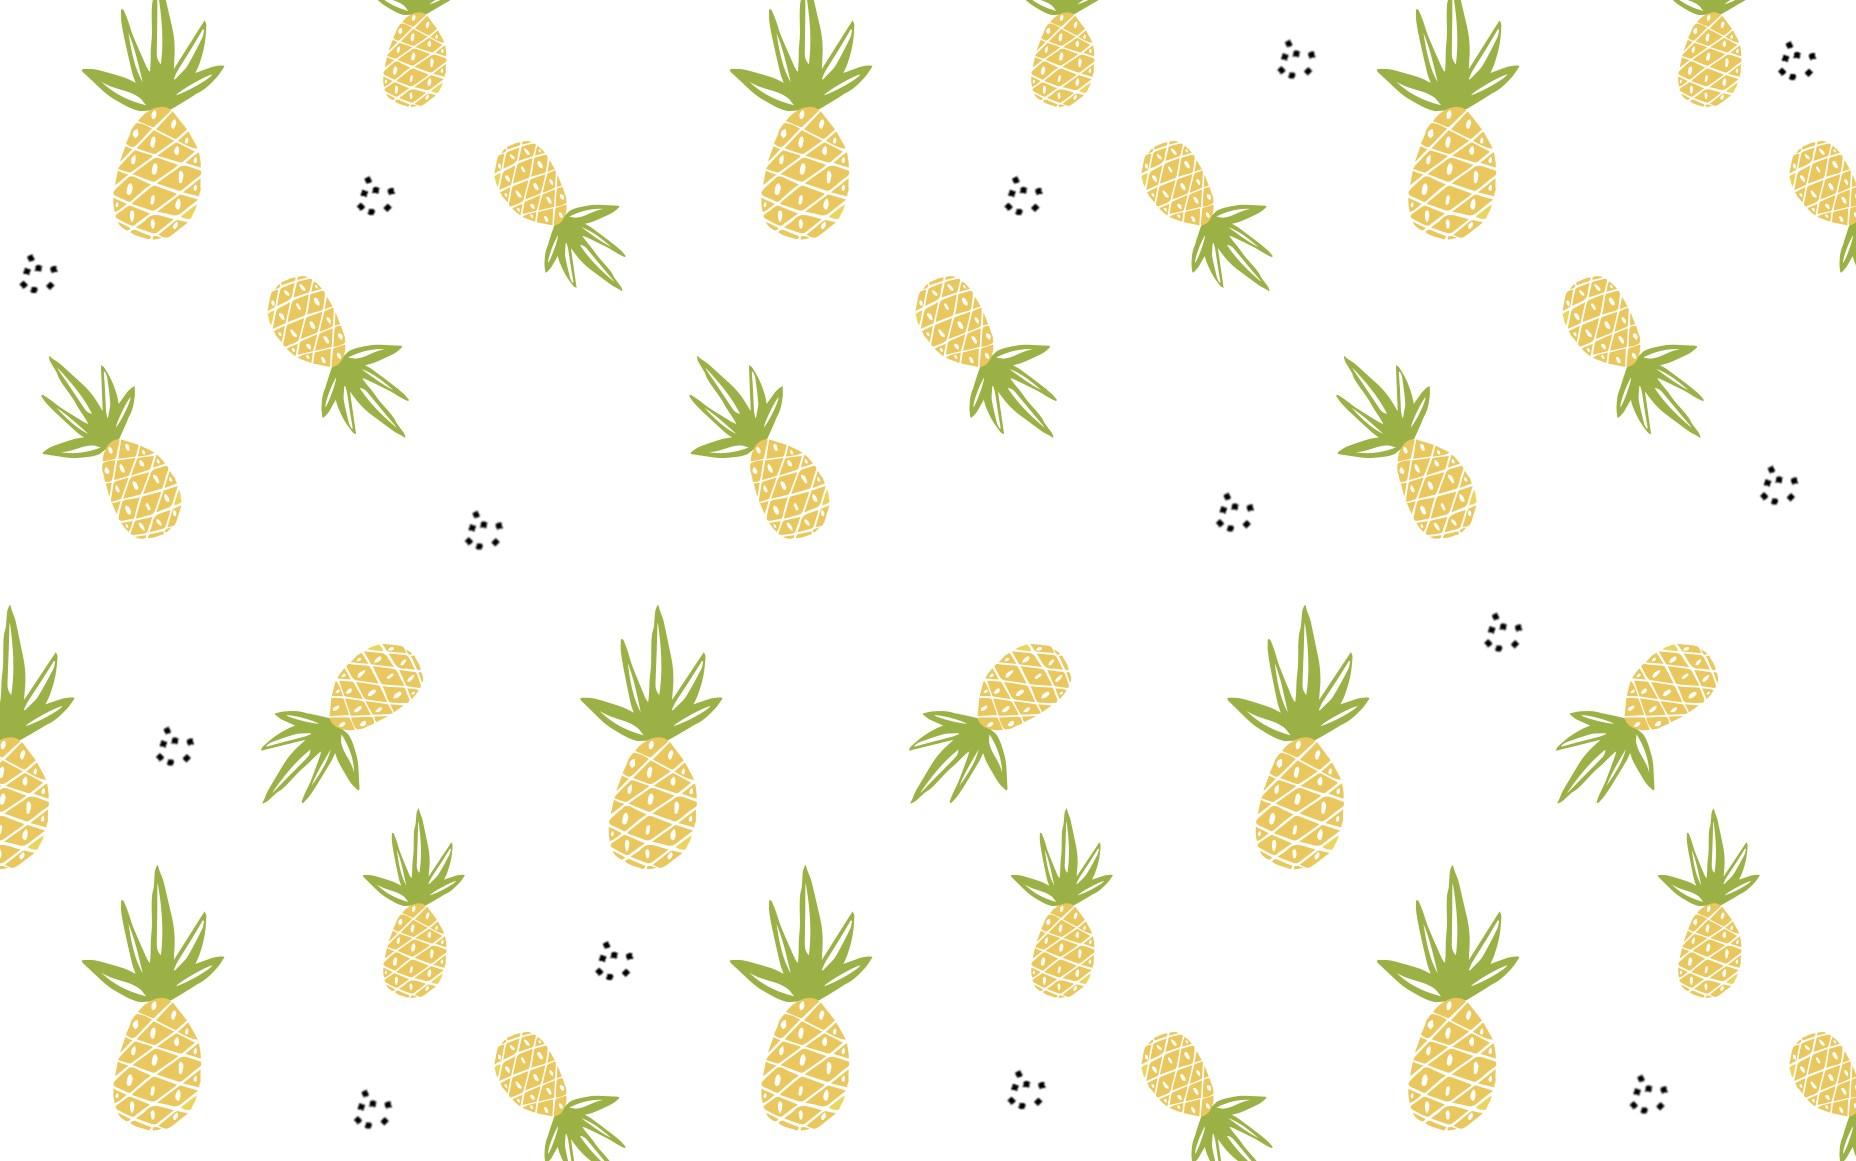 pineapple aesthetic wallpapers wallpaper cave on pineapple aesthetic wallpapers